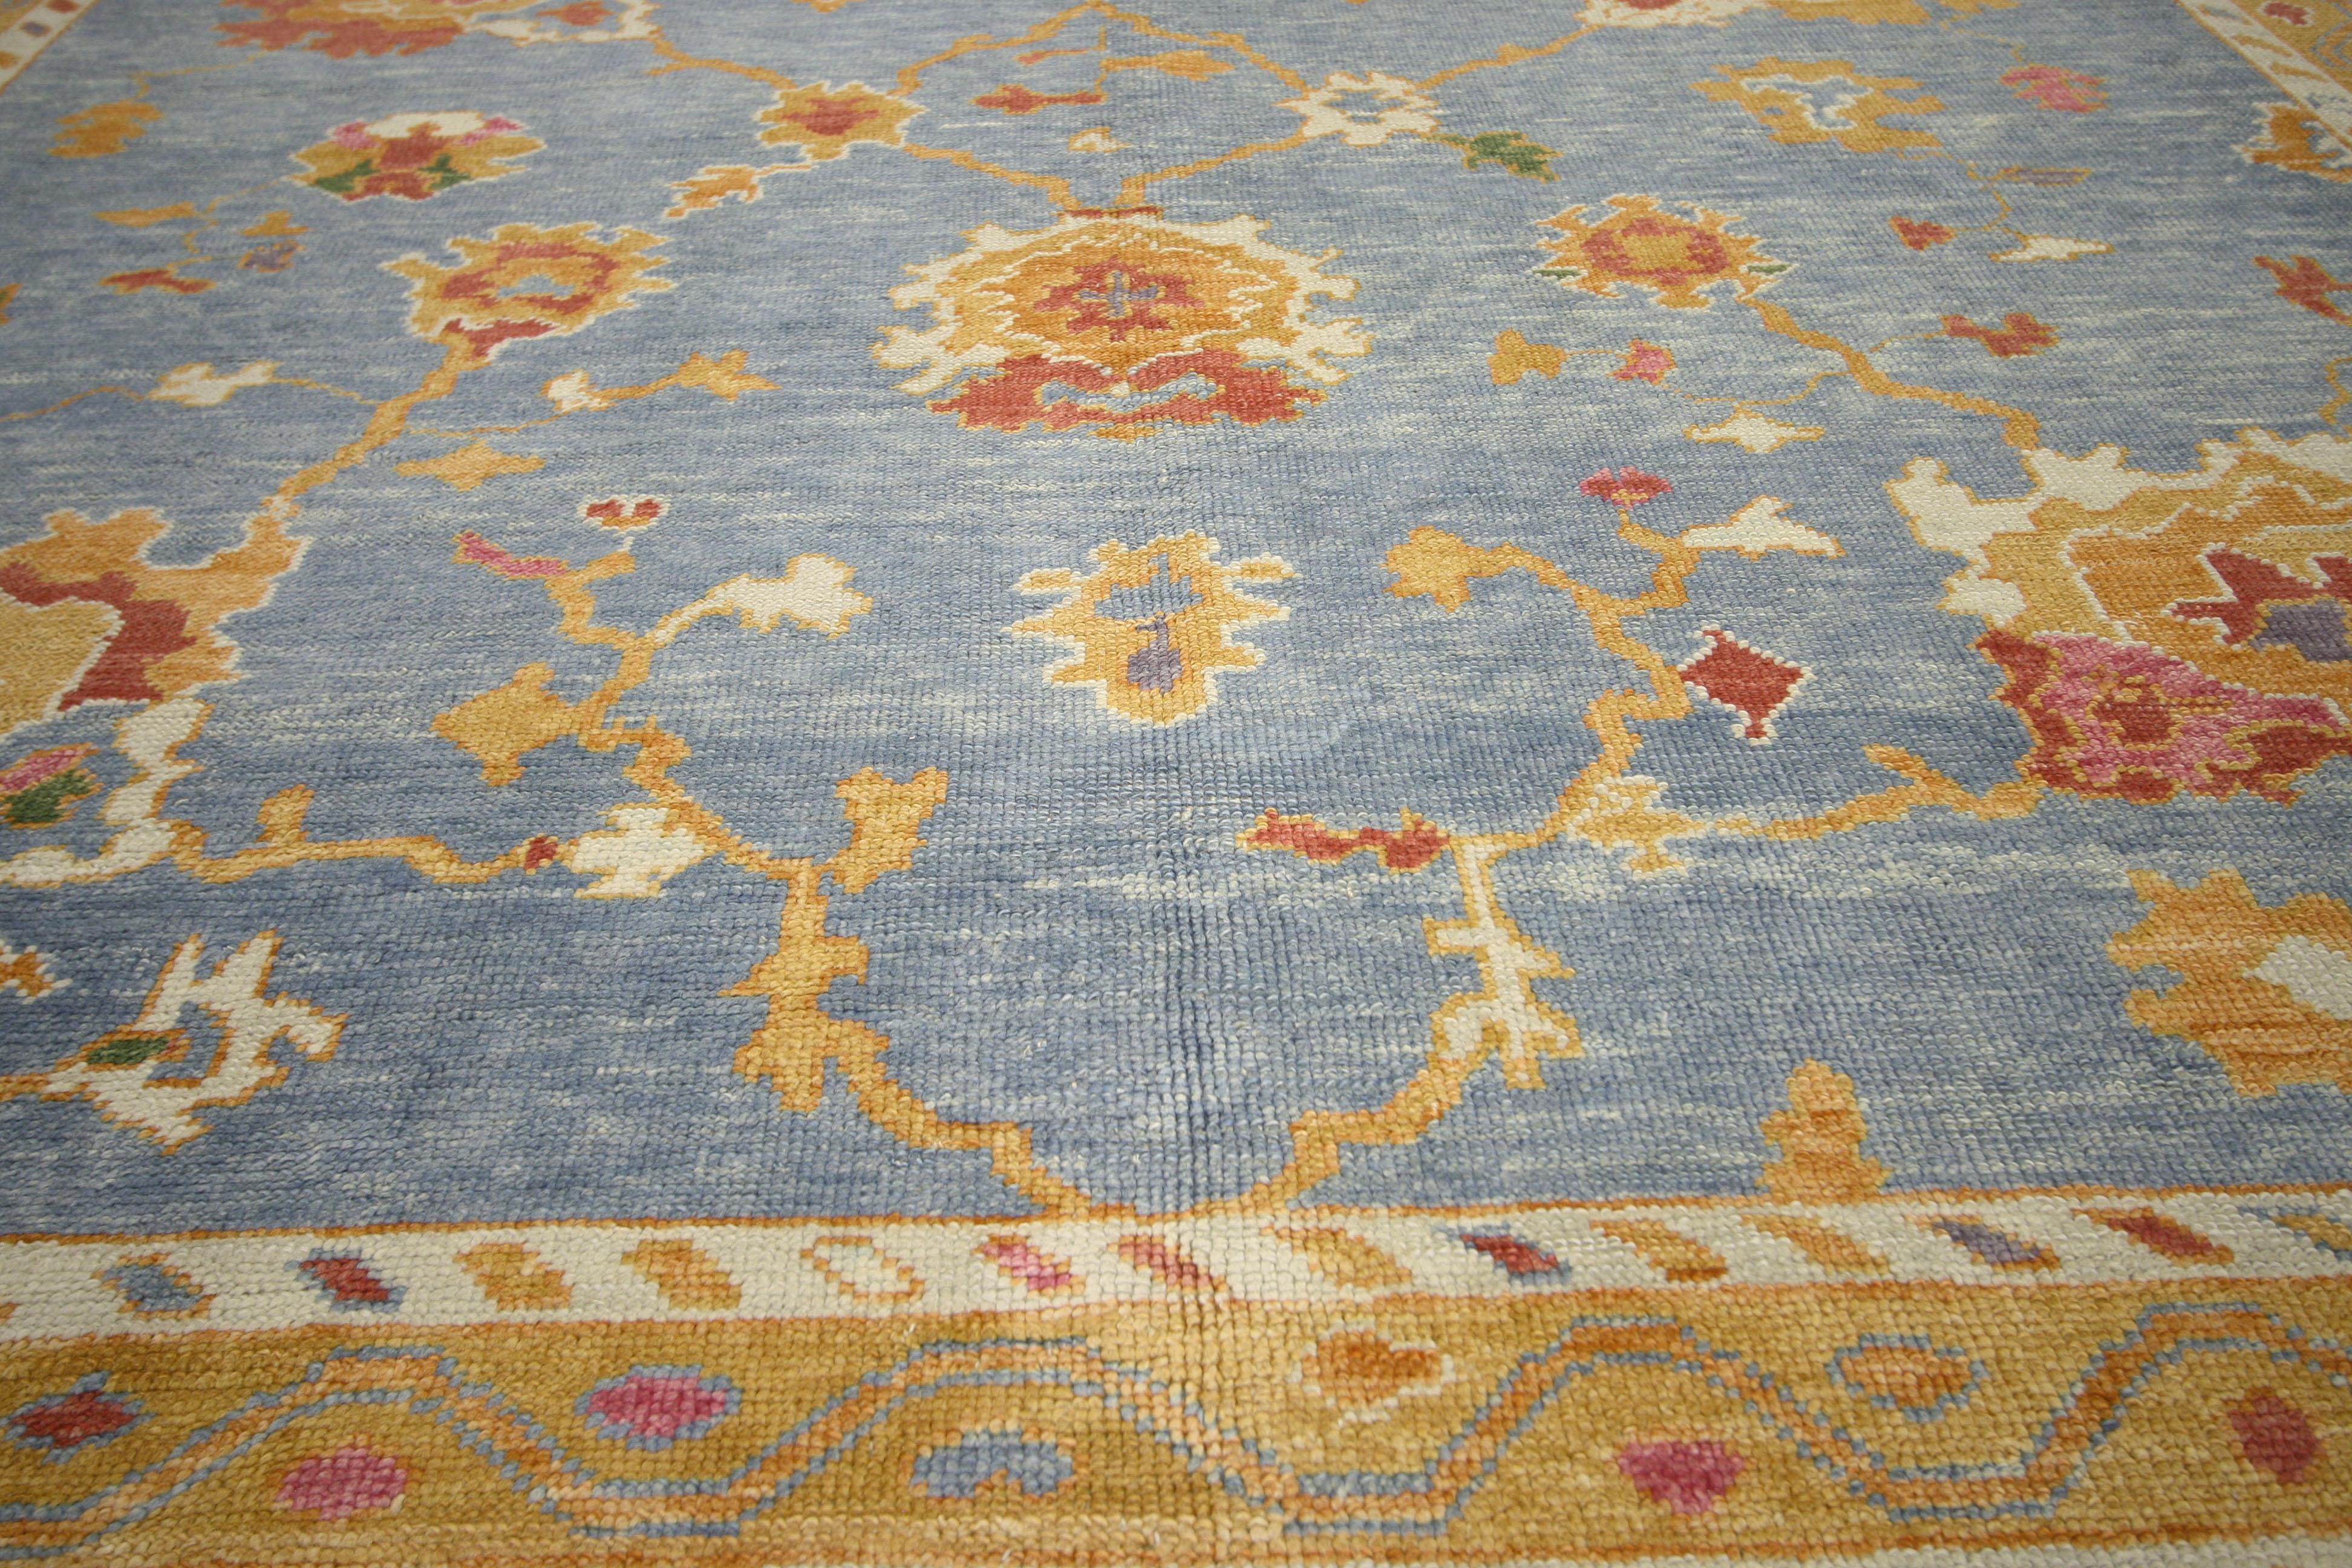 52381, New Contemporary Turkish Oushak Area Rug with Modern Coastal Style. This hand knotted wool contemporary Turkish Oushak rug features a sunny all-over floral pattern spread across an abrashed soft cerulean field. Large expressive palmettes,